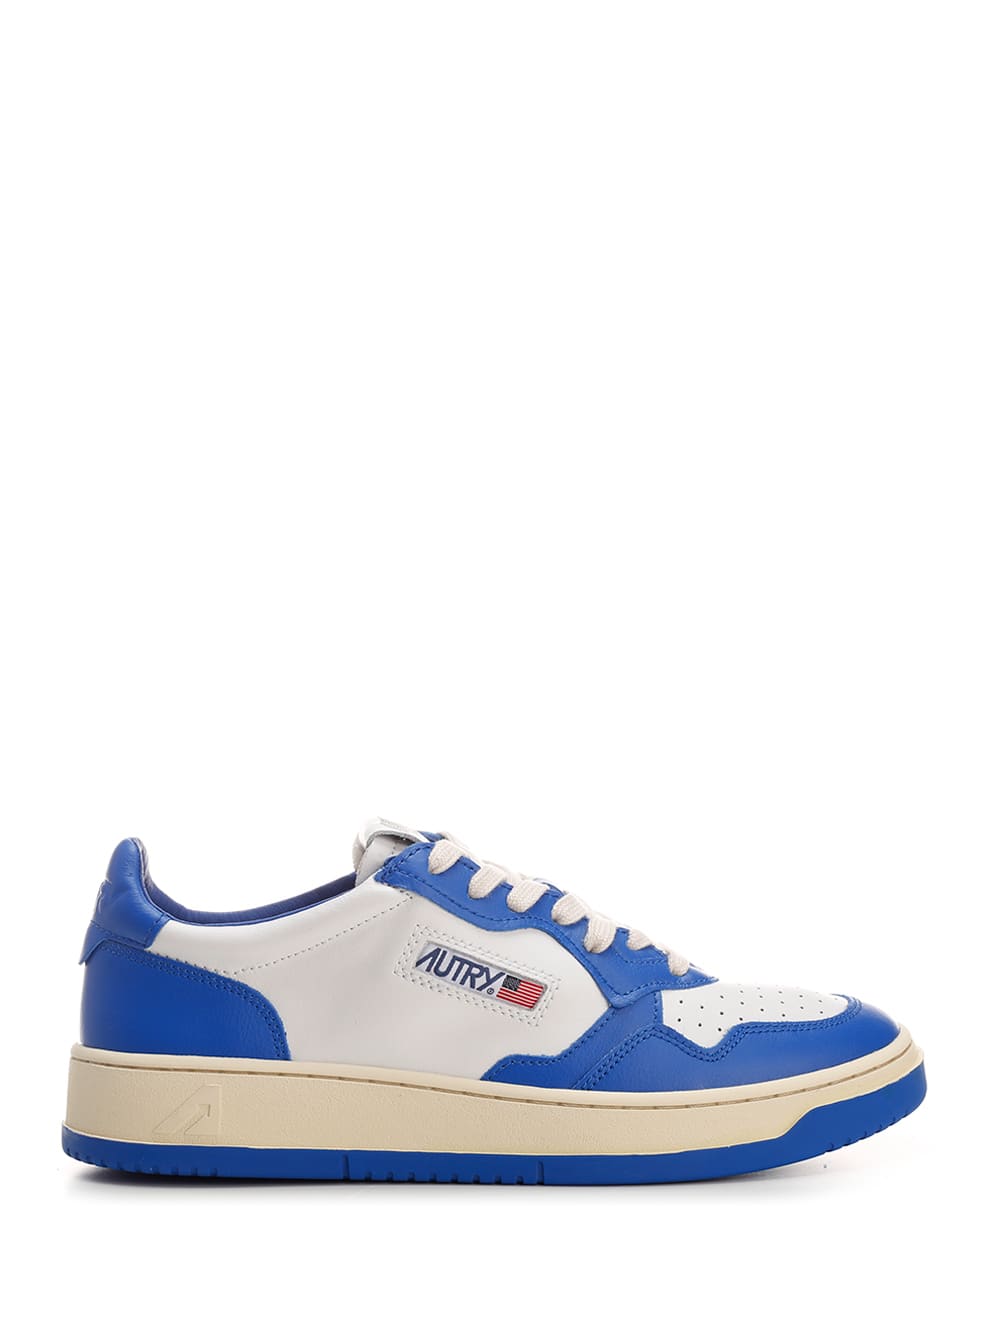 AUTRY WHITE/ROYAL MEDALIST SNEAKERS